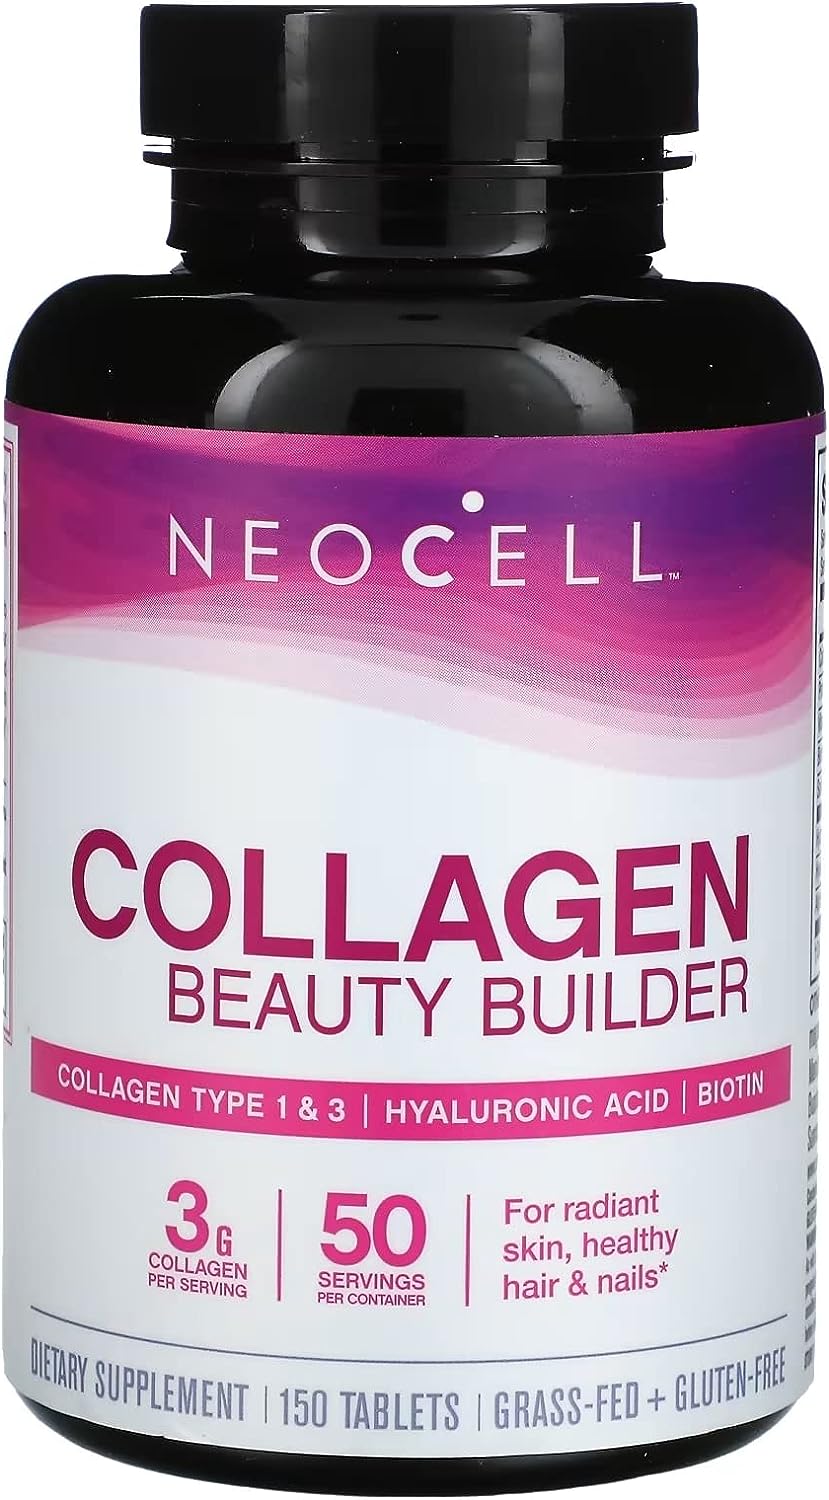 NeoCell Collagen Beauty Builder With Hyaluronic Acid and Biotin, Skin, Hair and Nails Supplement, Includes Antioxidants, Tablet, 150 Count, 1 Bottle